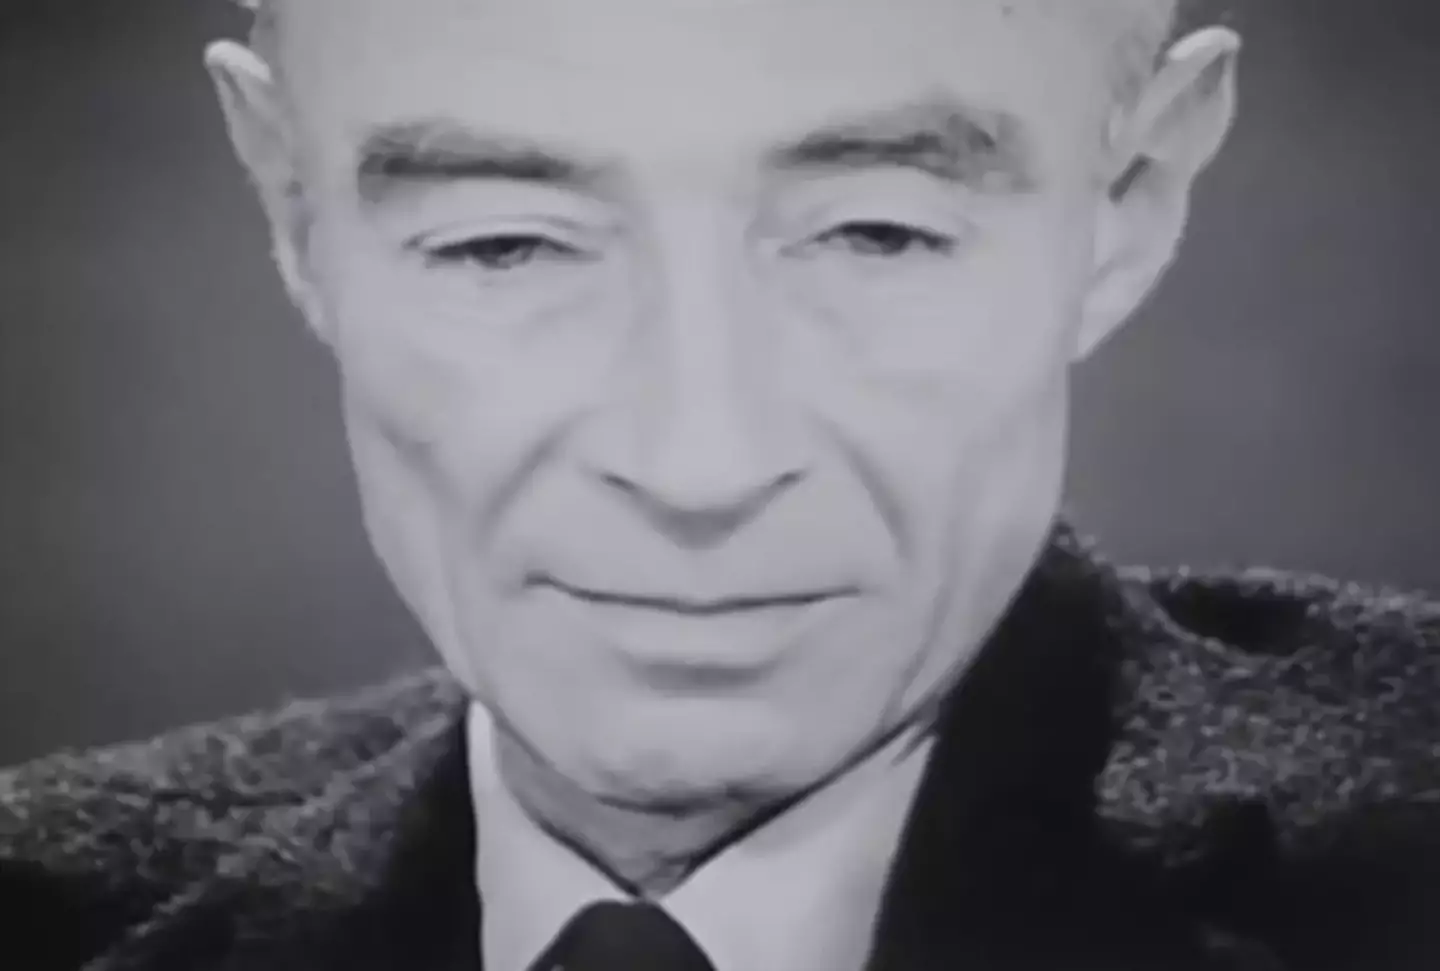 Oppenheimer's grandson has an issue with a 'serious accusation' against the scientist in the film.